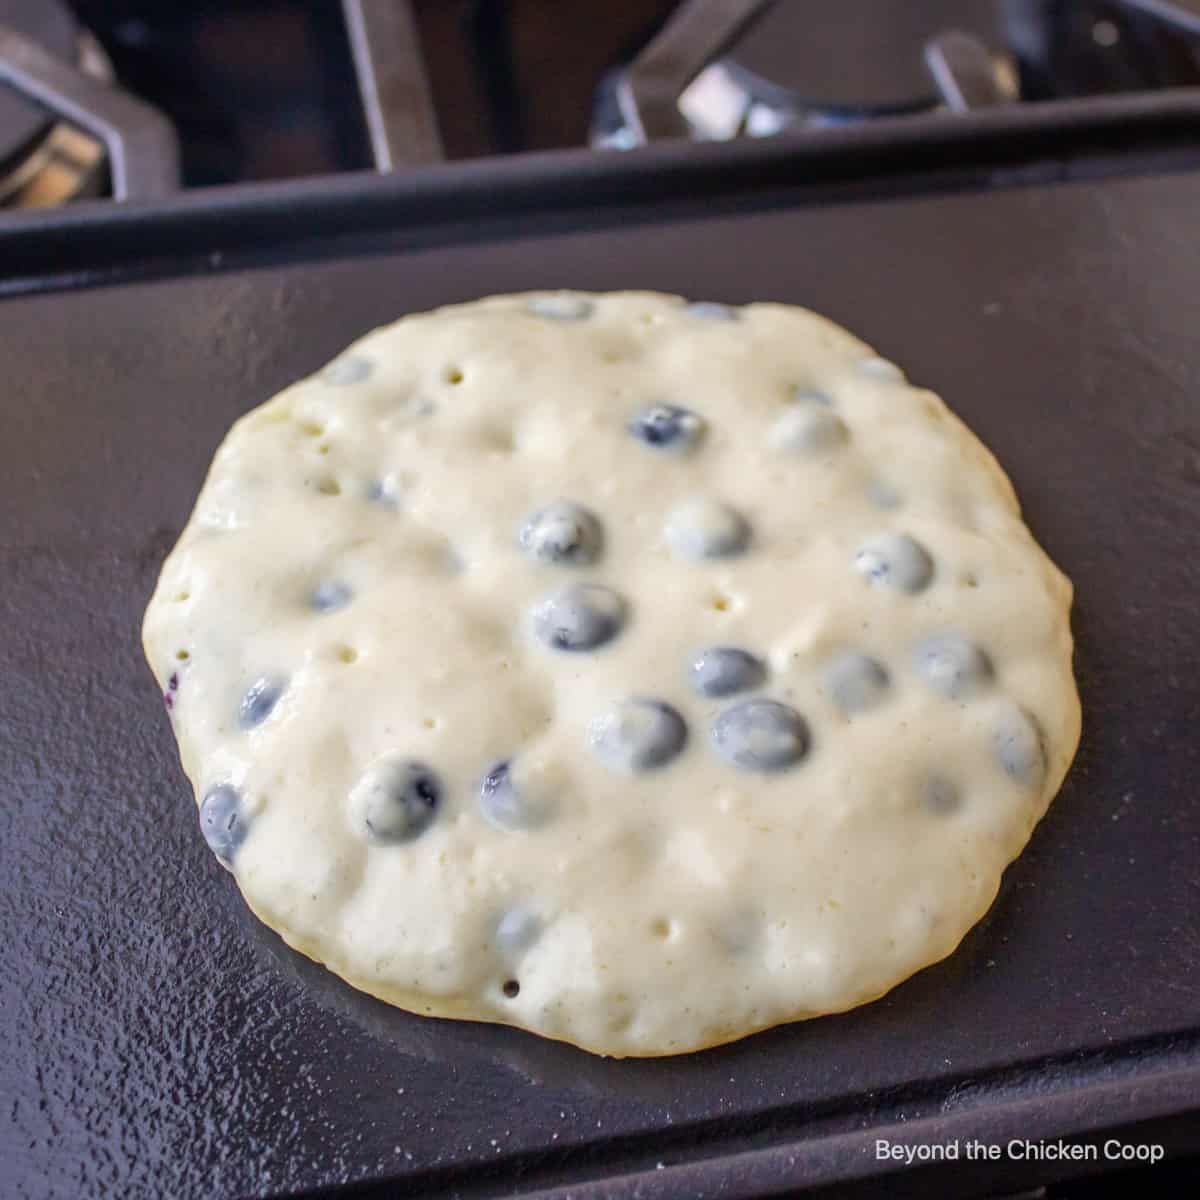 Cooking blueberry pancakes.